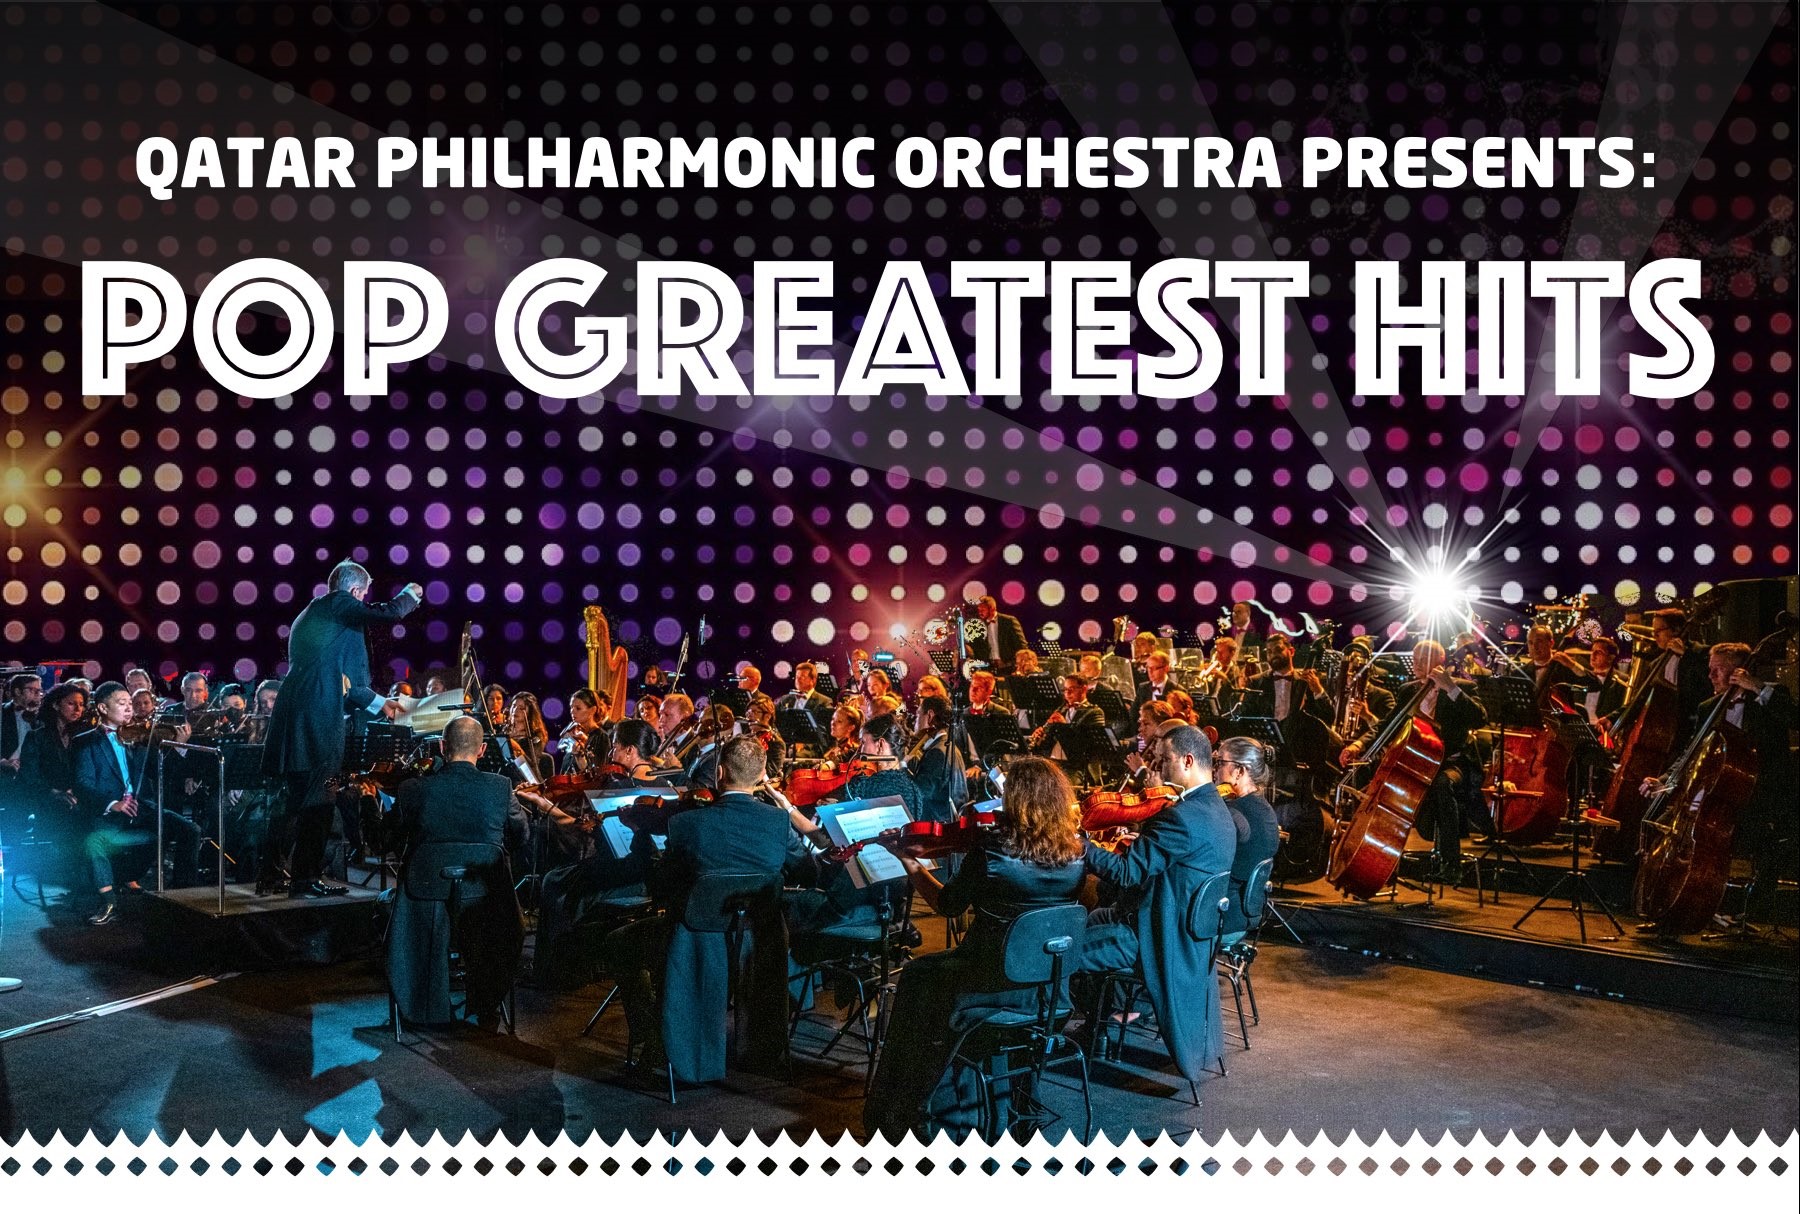 A Night of Pop Greatest Hits: Qatar Philharmonic Orchestra Live!